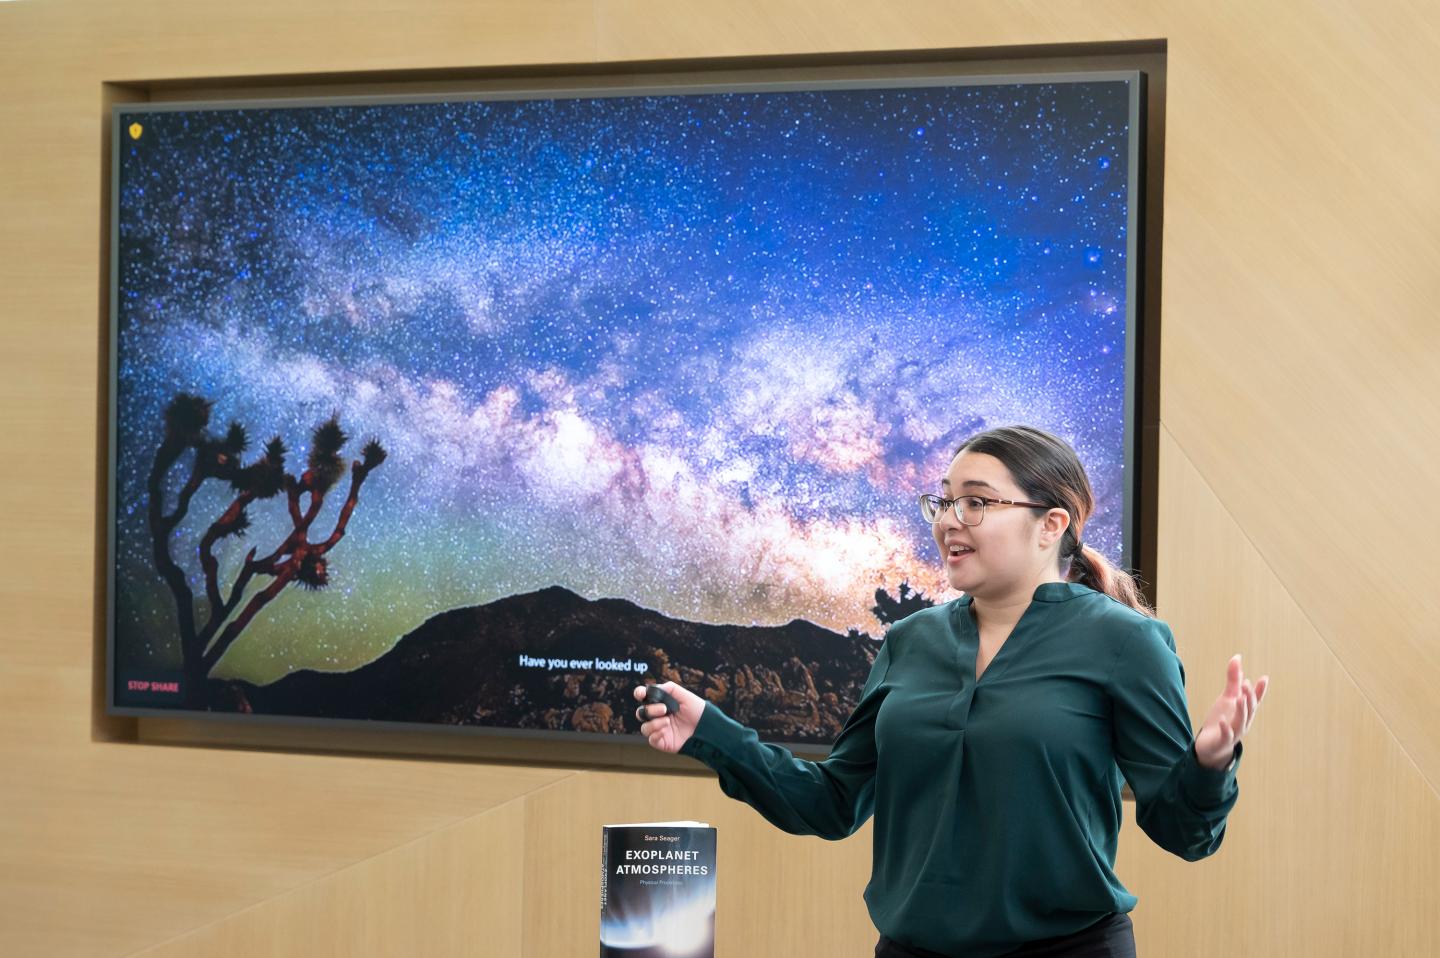 A young woman in a dark green blouse stands in front of a large display screen with colorful image of the night sky and stars